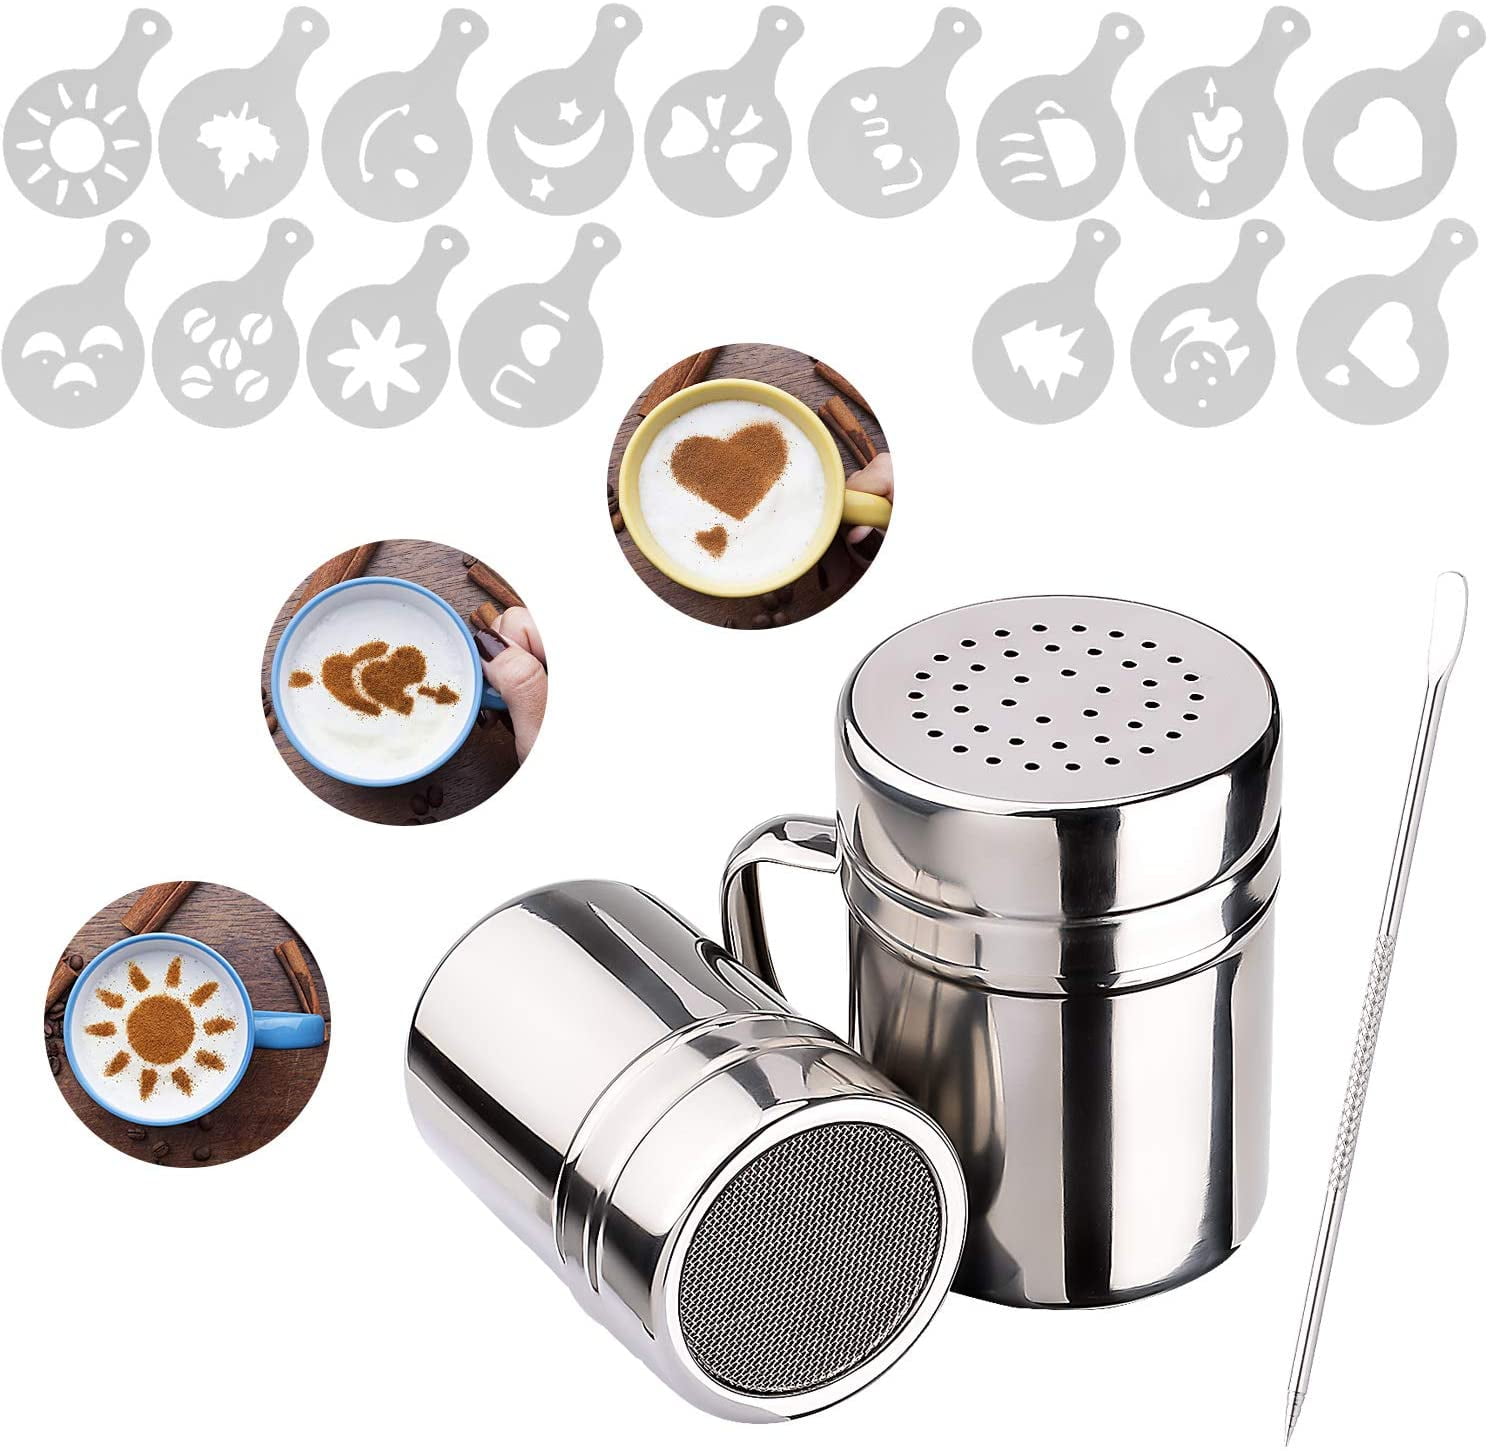 Cuisinox Stainless Steel Chocolate/Icing Sugar/Cocoa Powder/ Shaker Duster Coffee Stencils Cappuccino Latte Art